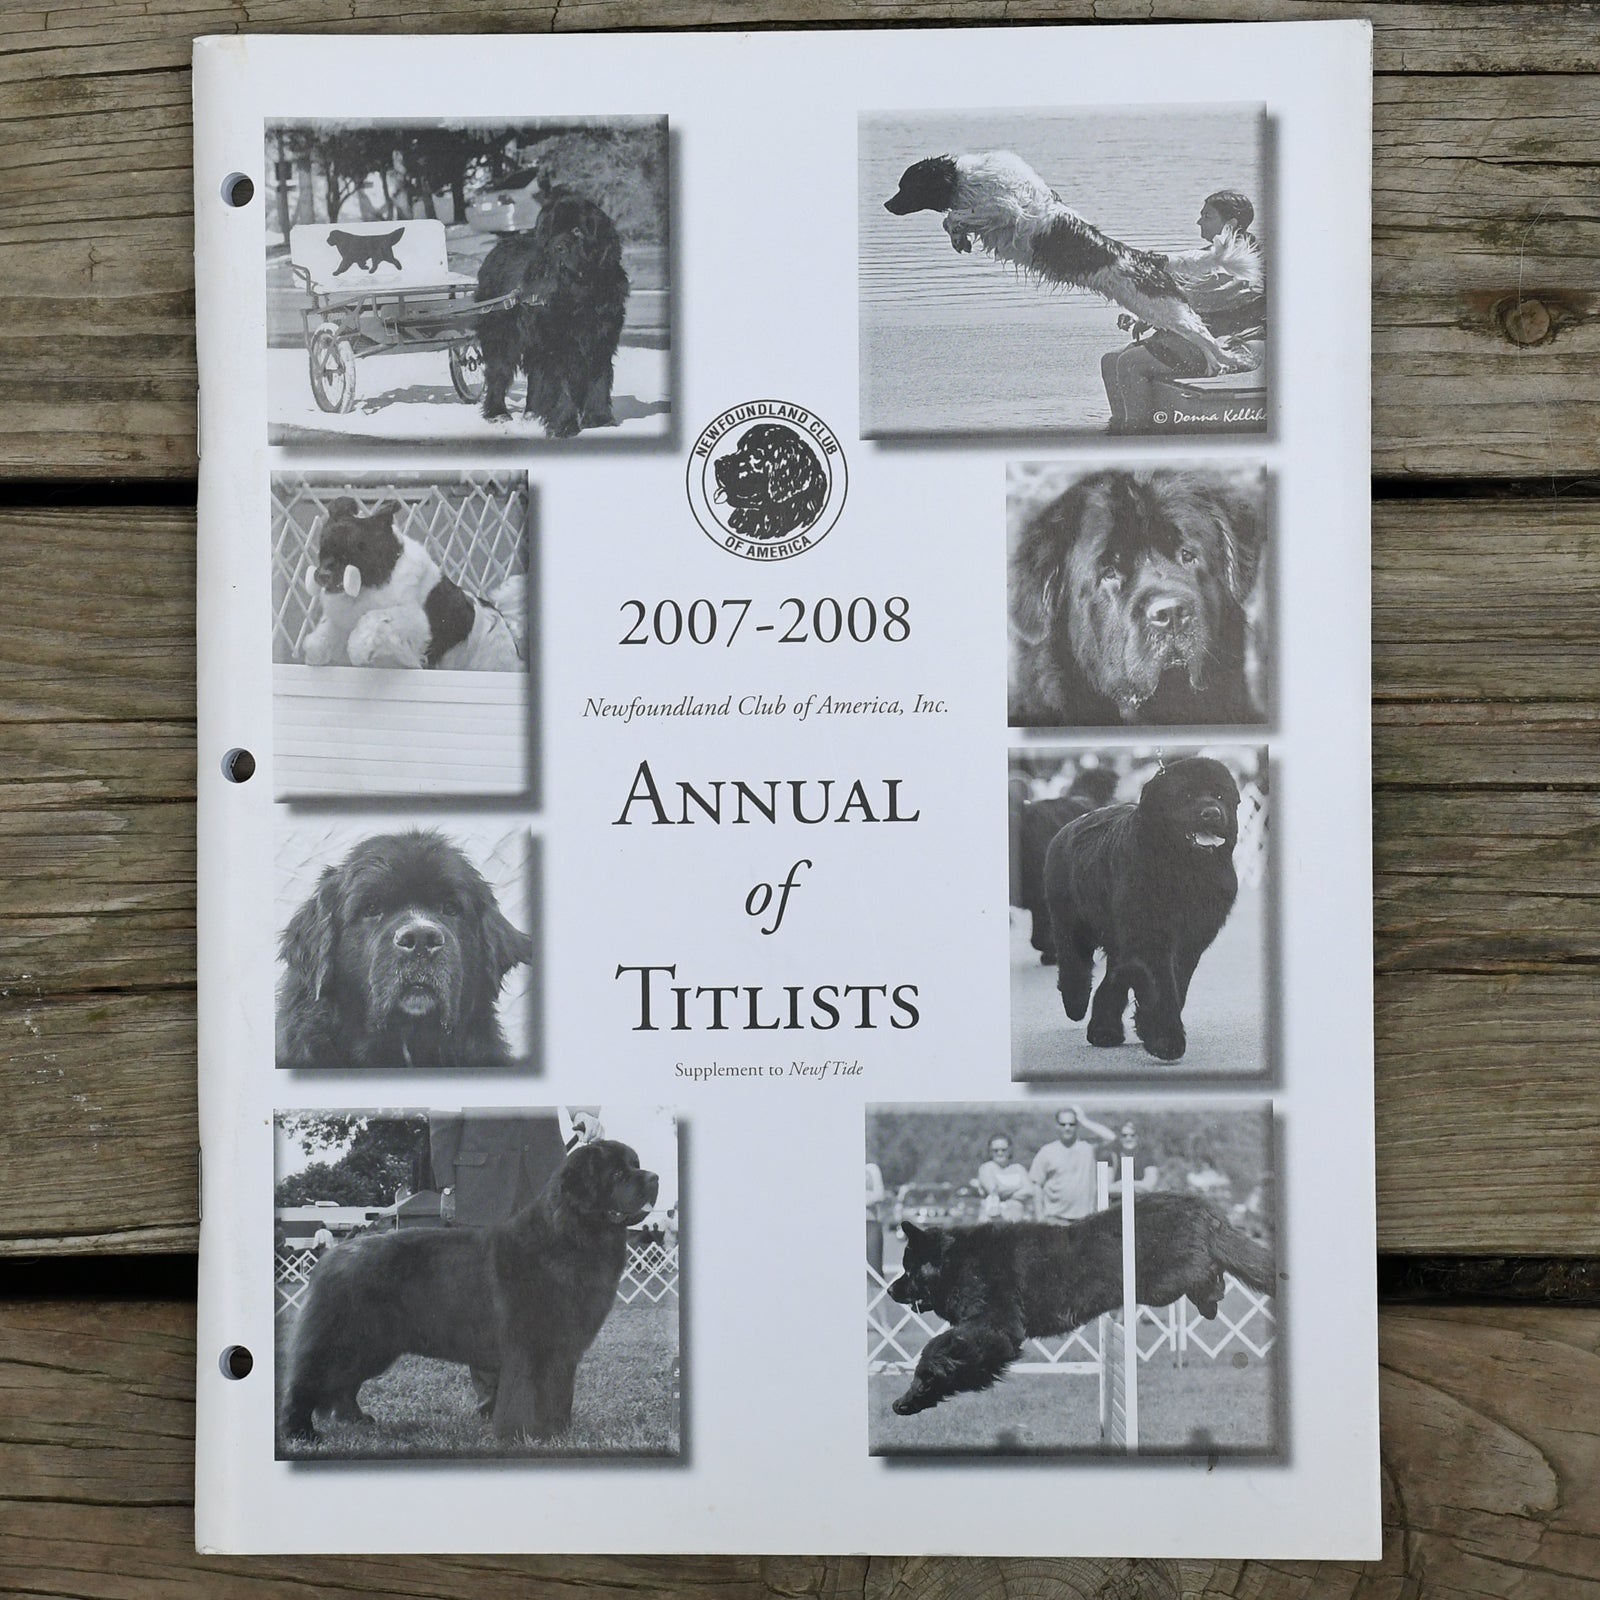 2007-2008 Annual of Titlists